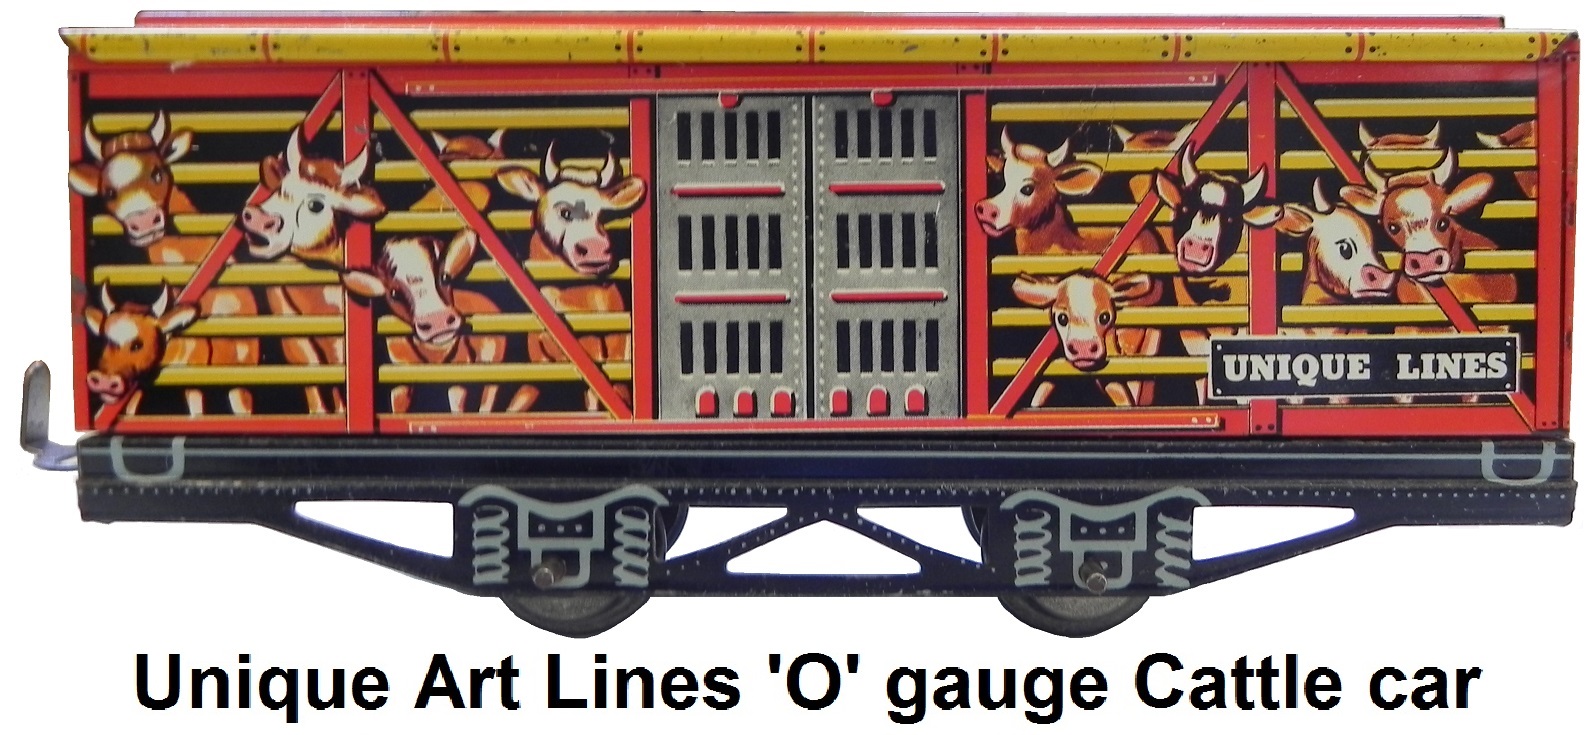 Unique Art tinplate 'O' gauge cattle car with comical lithography, catalogued in only one set 1949-51